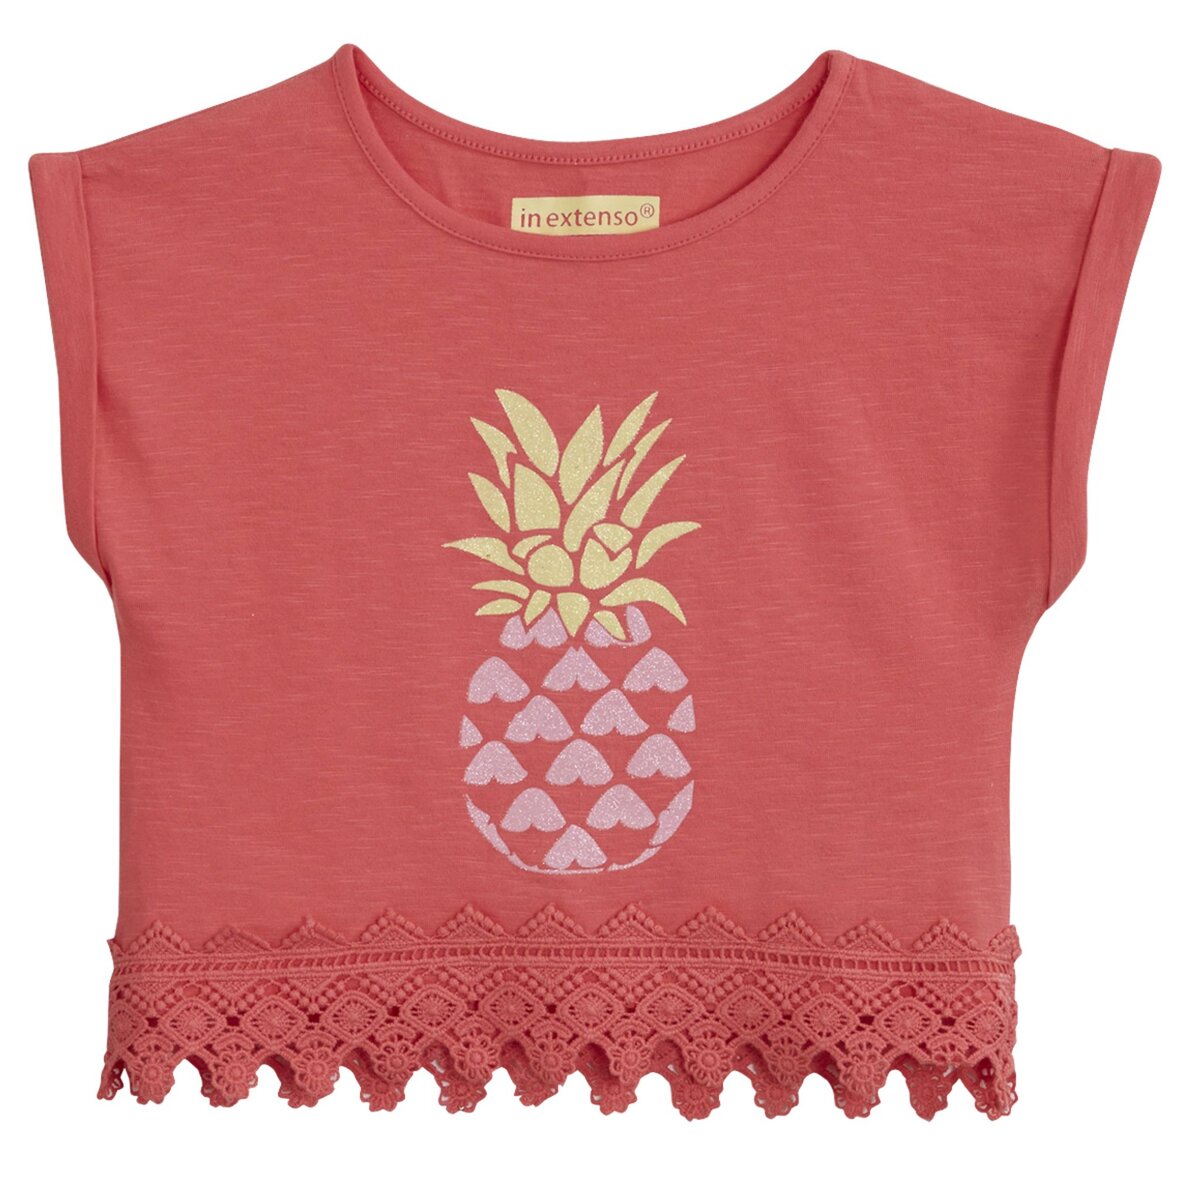 IN EXTENSO Tee-shirt court manches courtes Ananas fille